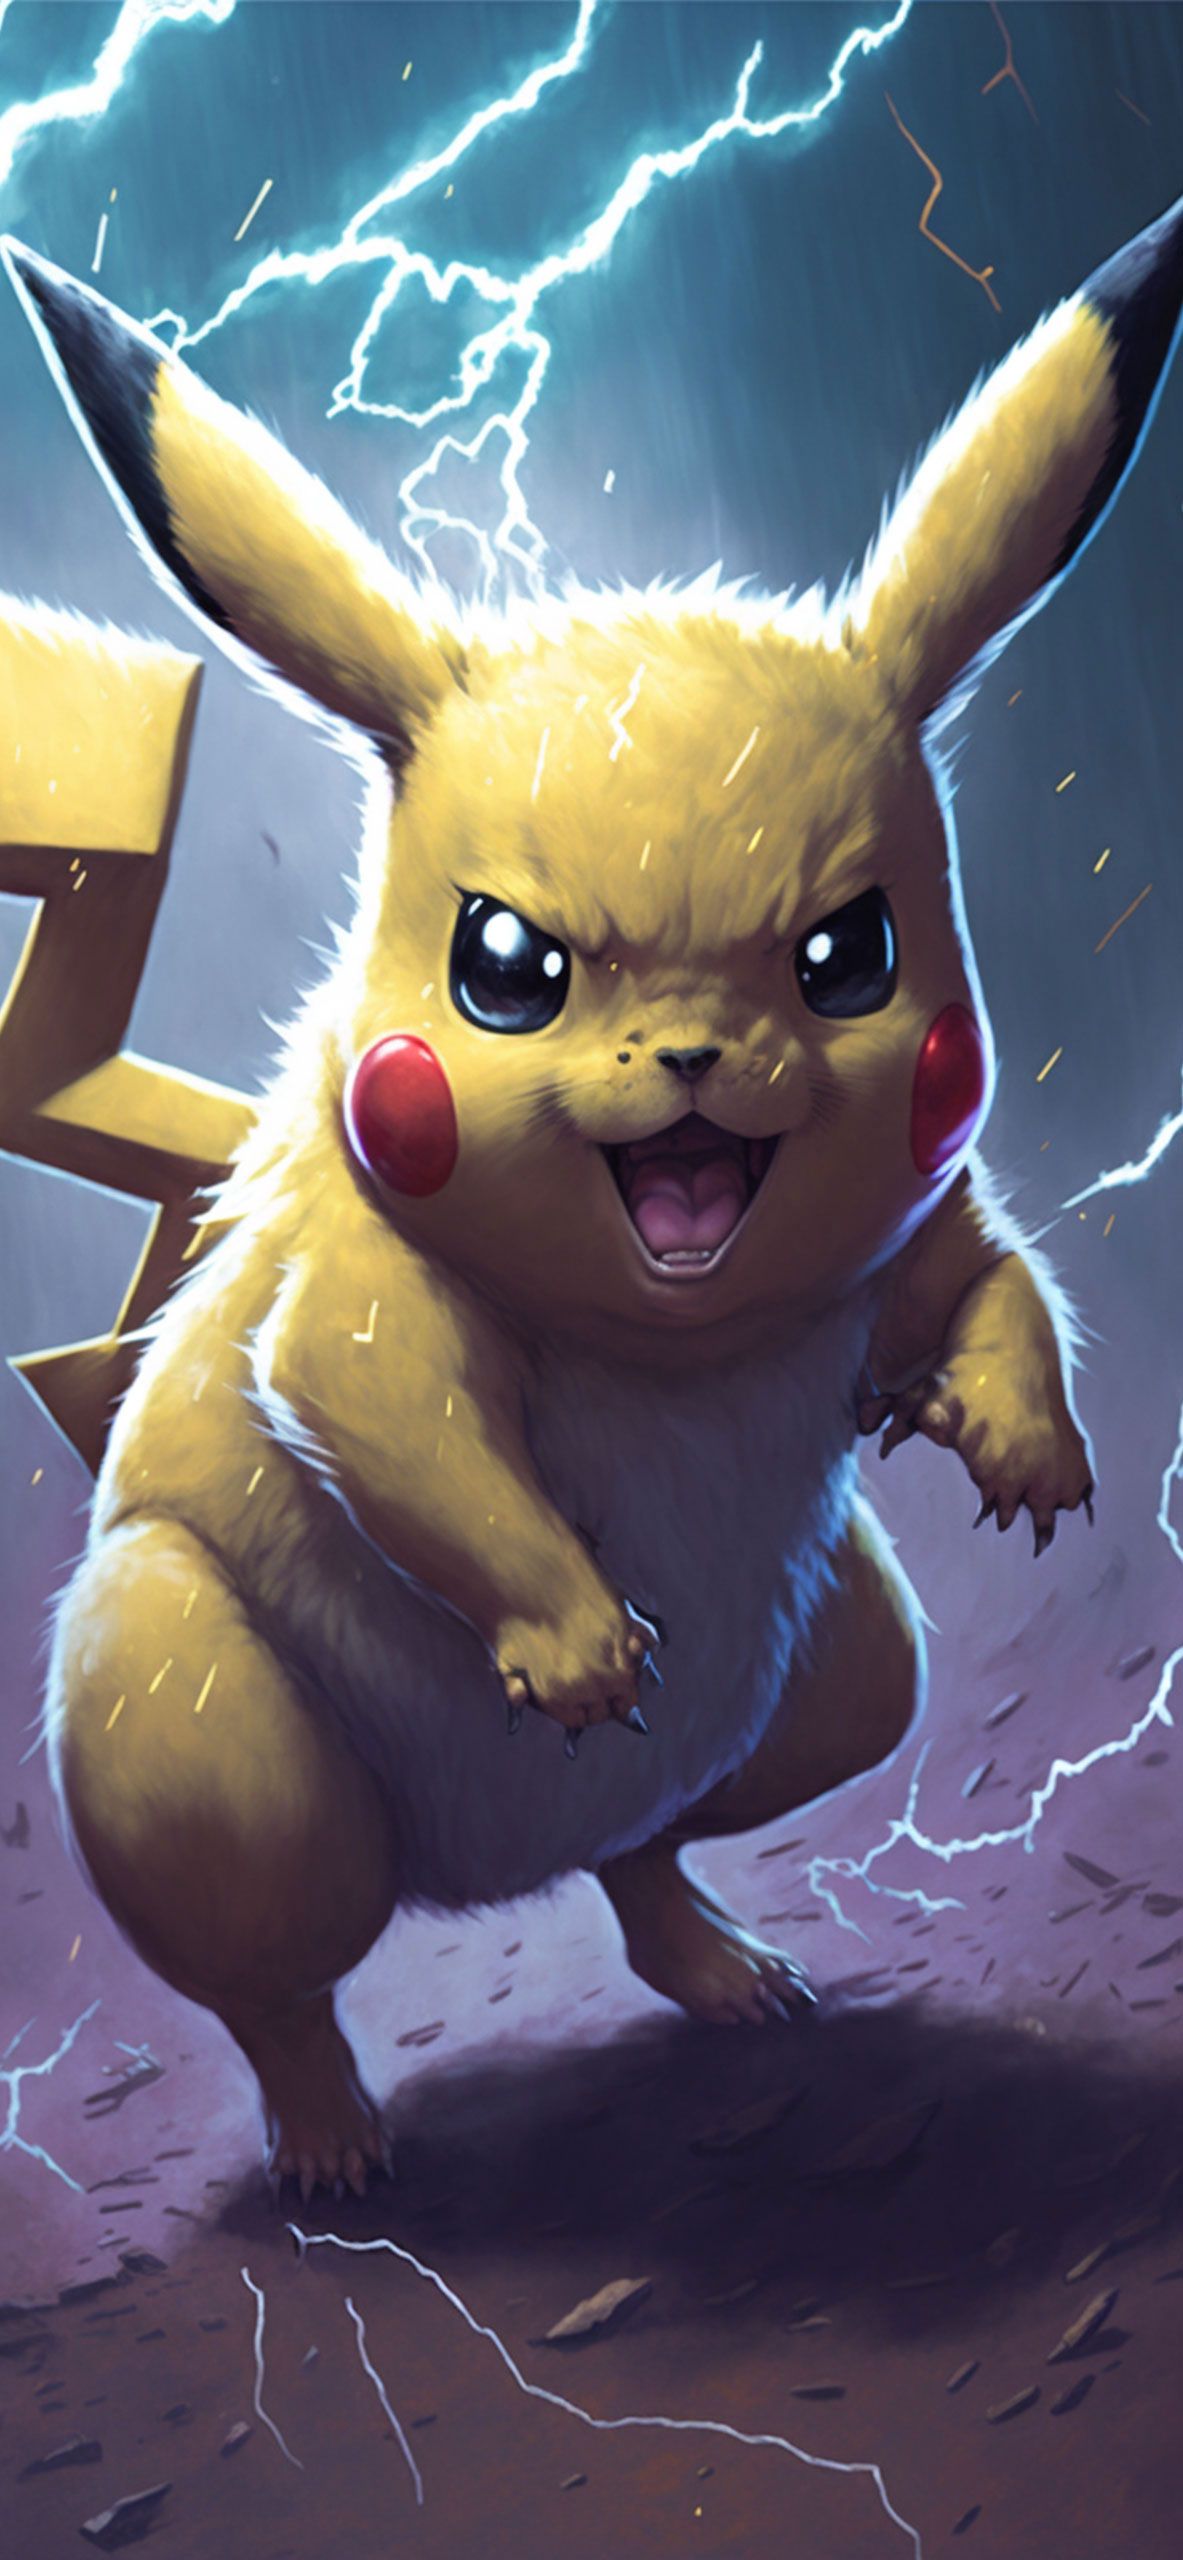 Pikachu wallpaper for iPhone and Android phone. - Pikachu